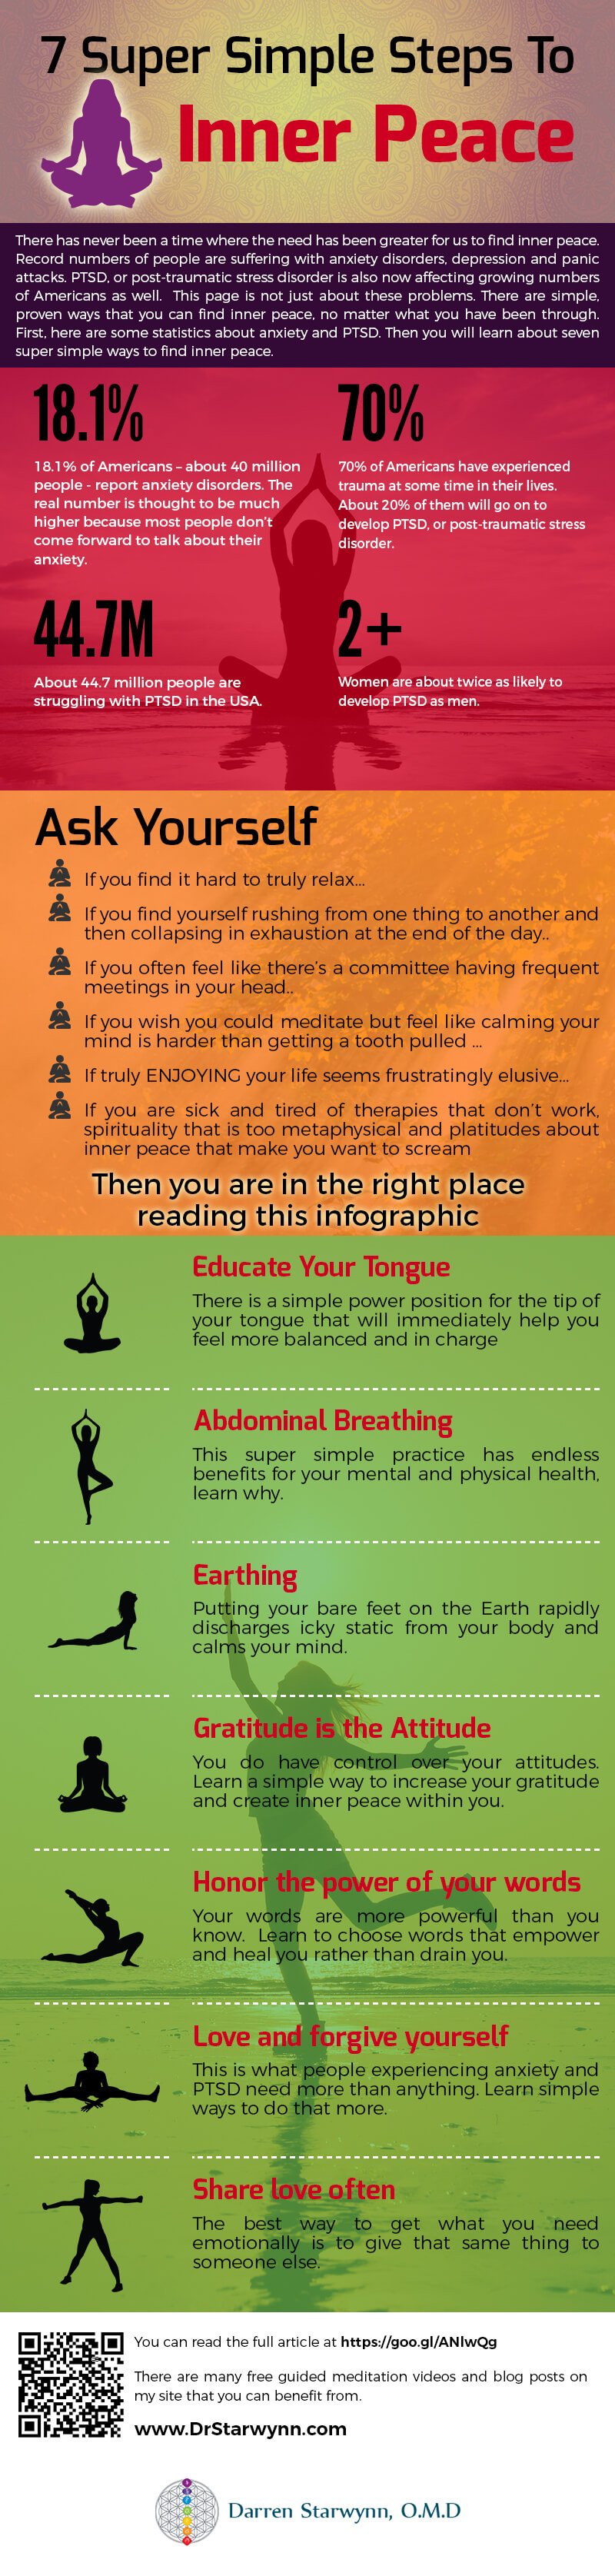 7 super simple steps to inner peace